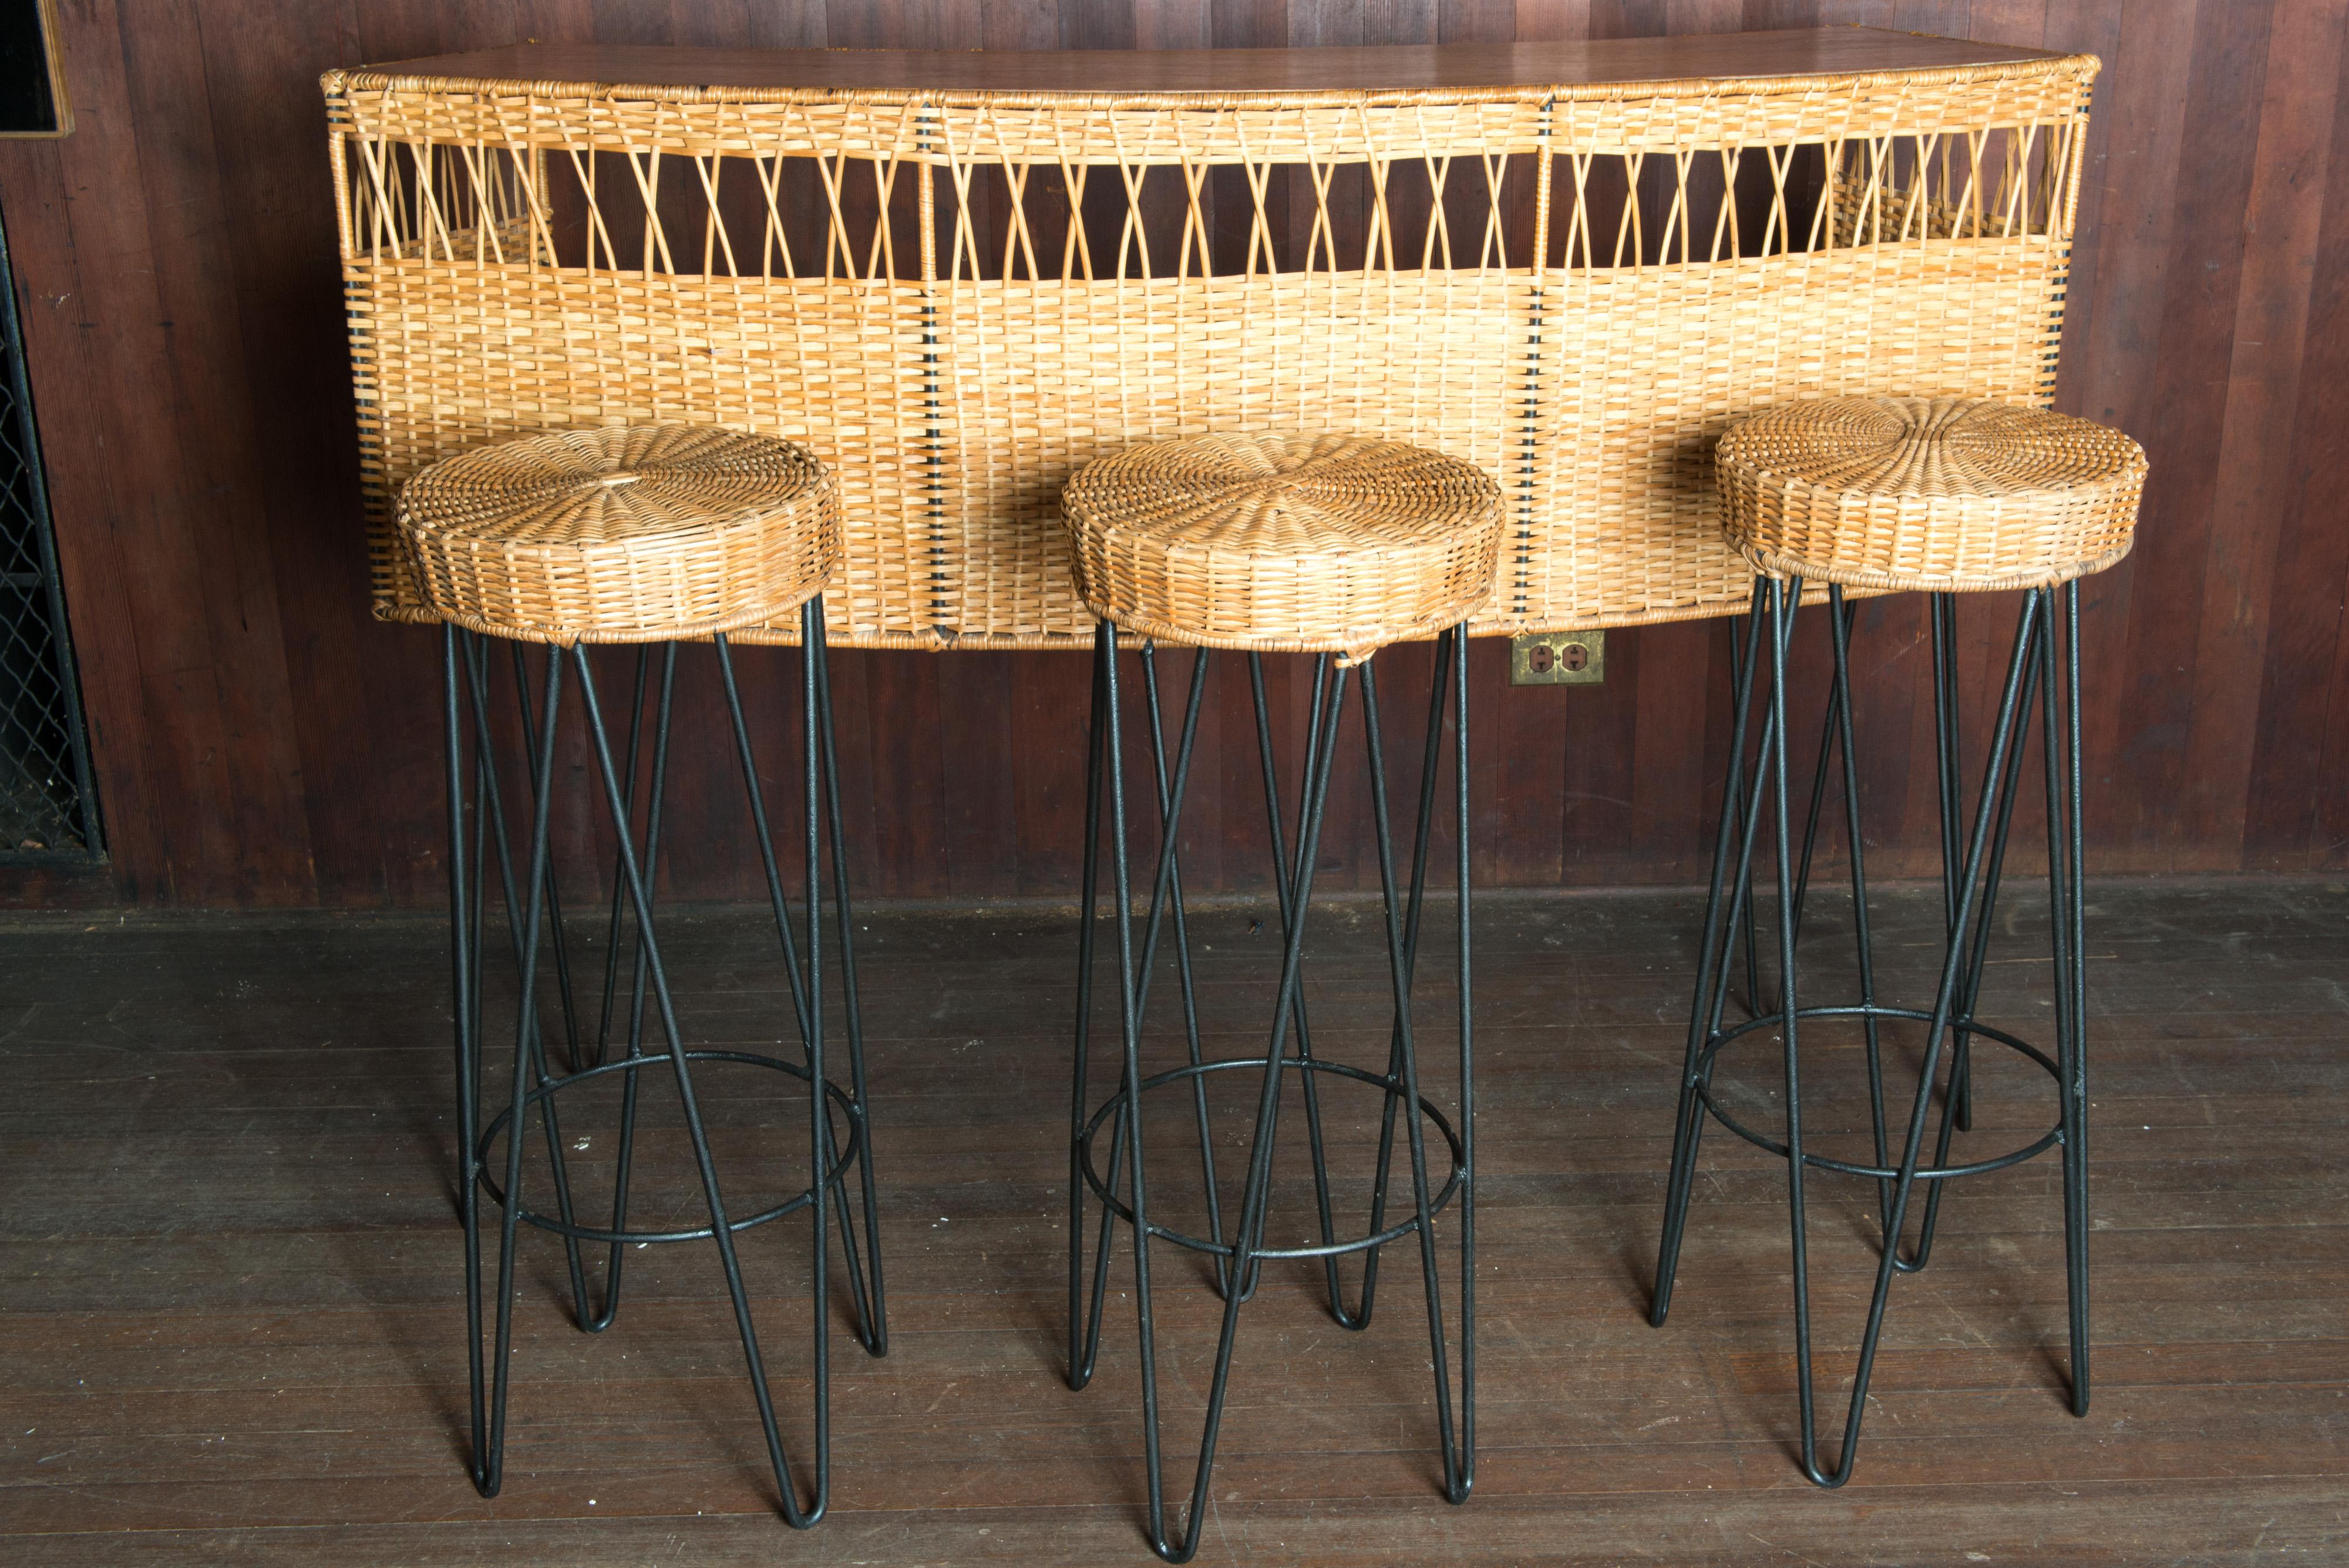 A spectacular South of France rattan bar and three stools, all with glamorous black wrought iron hair pin legs. The designer of this stunning curved bar and stools is Rauol Rhieys. The curved bar top is wood. The woven work is beautiful and in